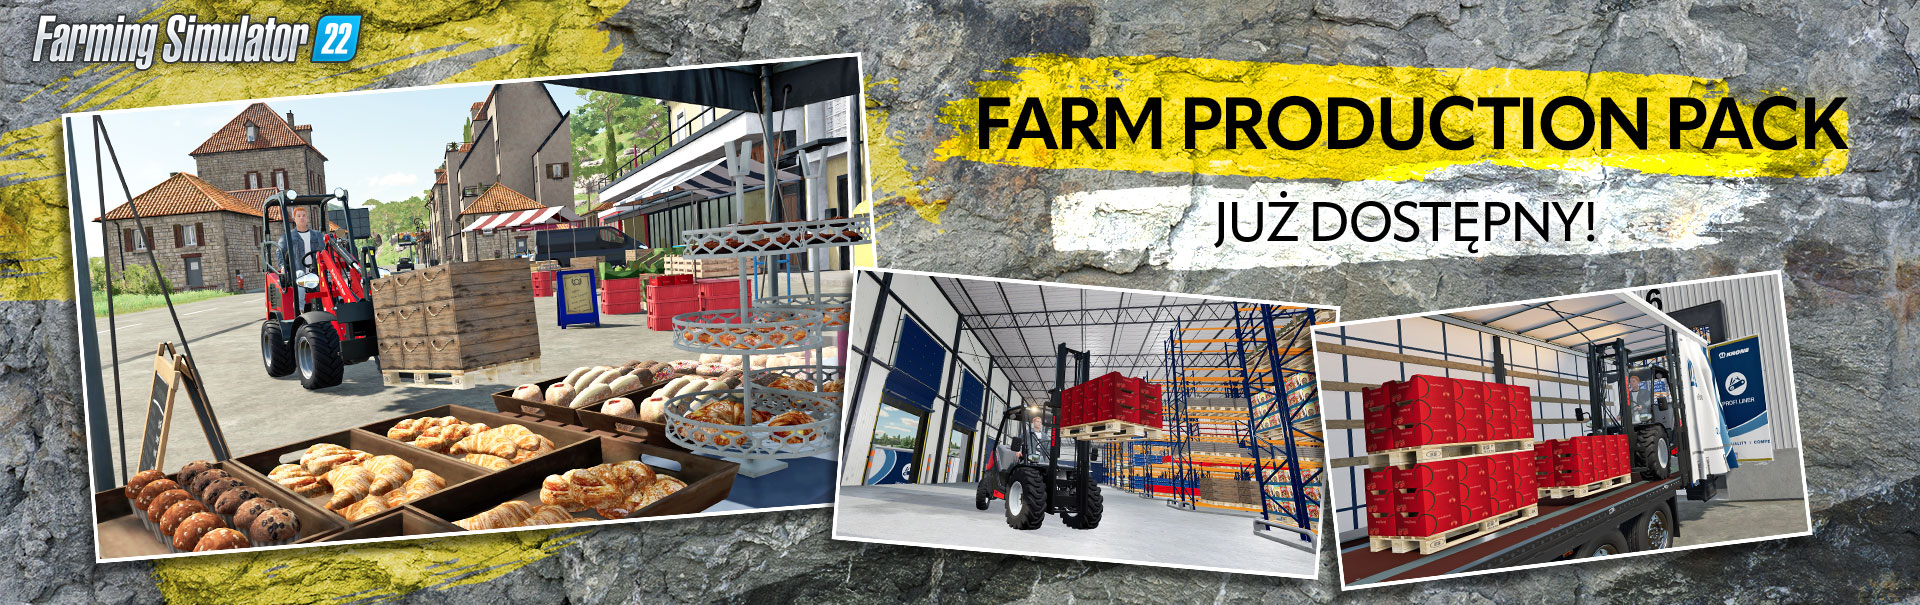 Farm Production Pack Available Now!